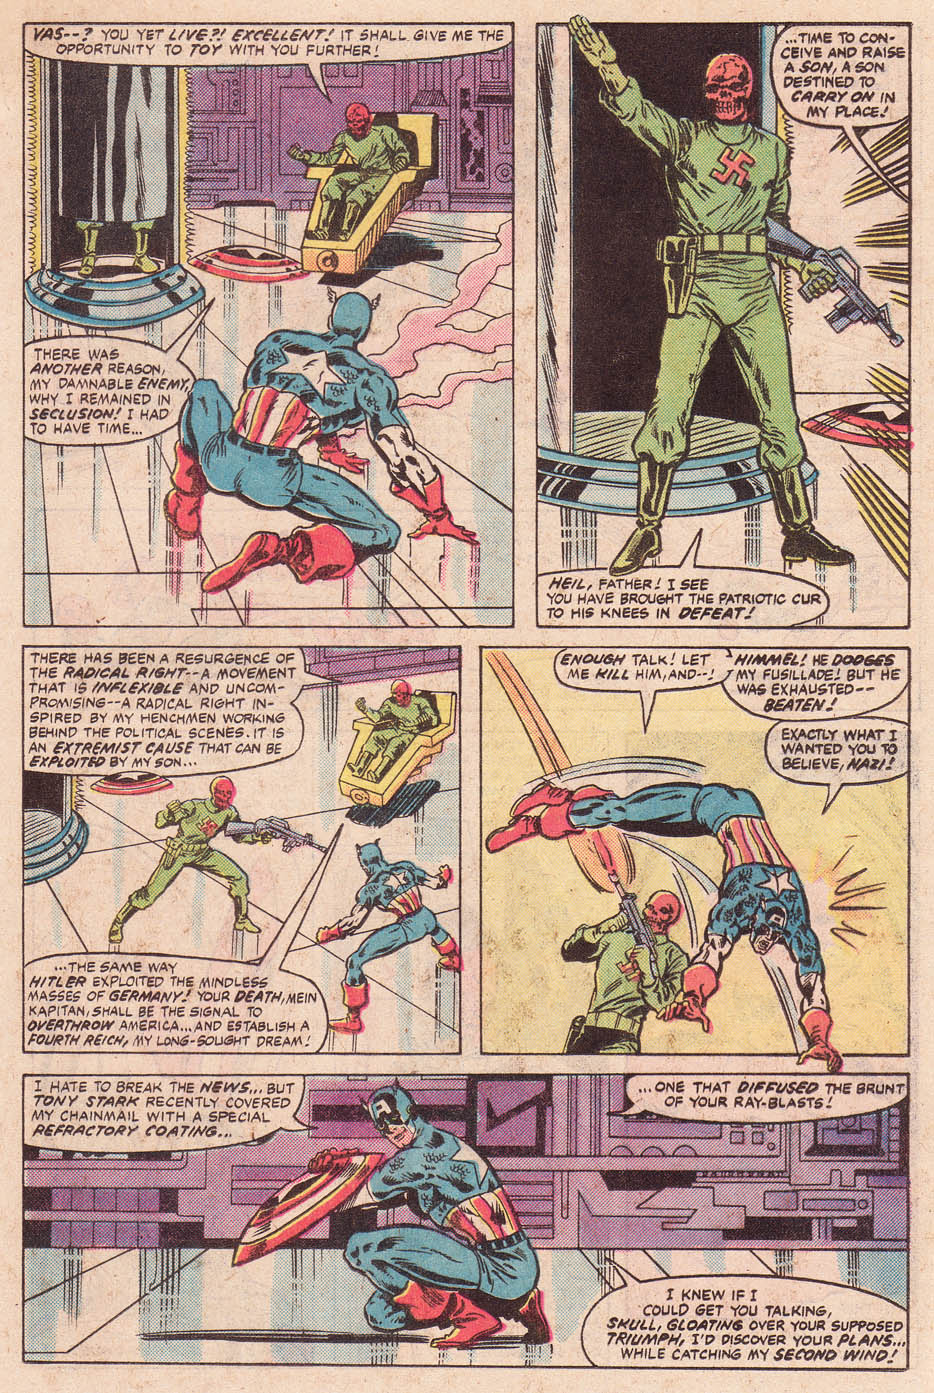 What If? (1977) issue 38 - Daredevil and Captain America - Page 25